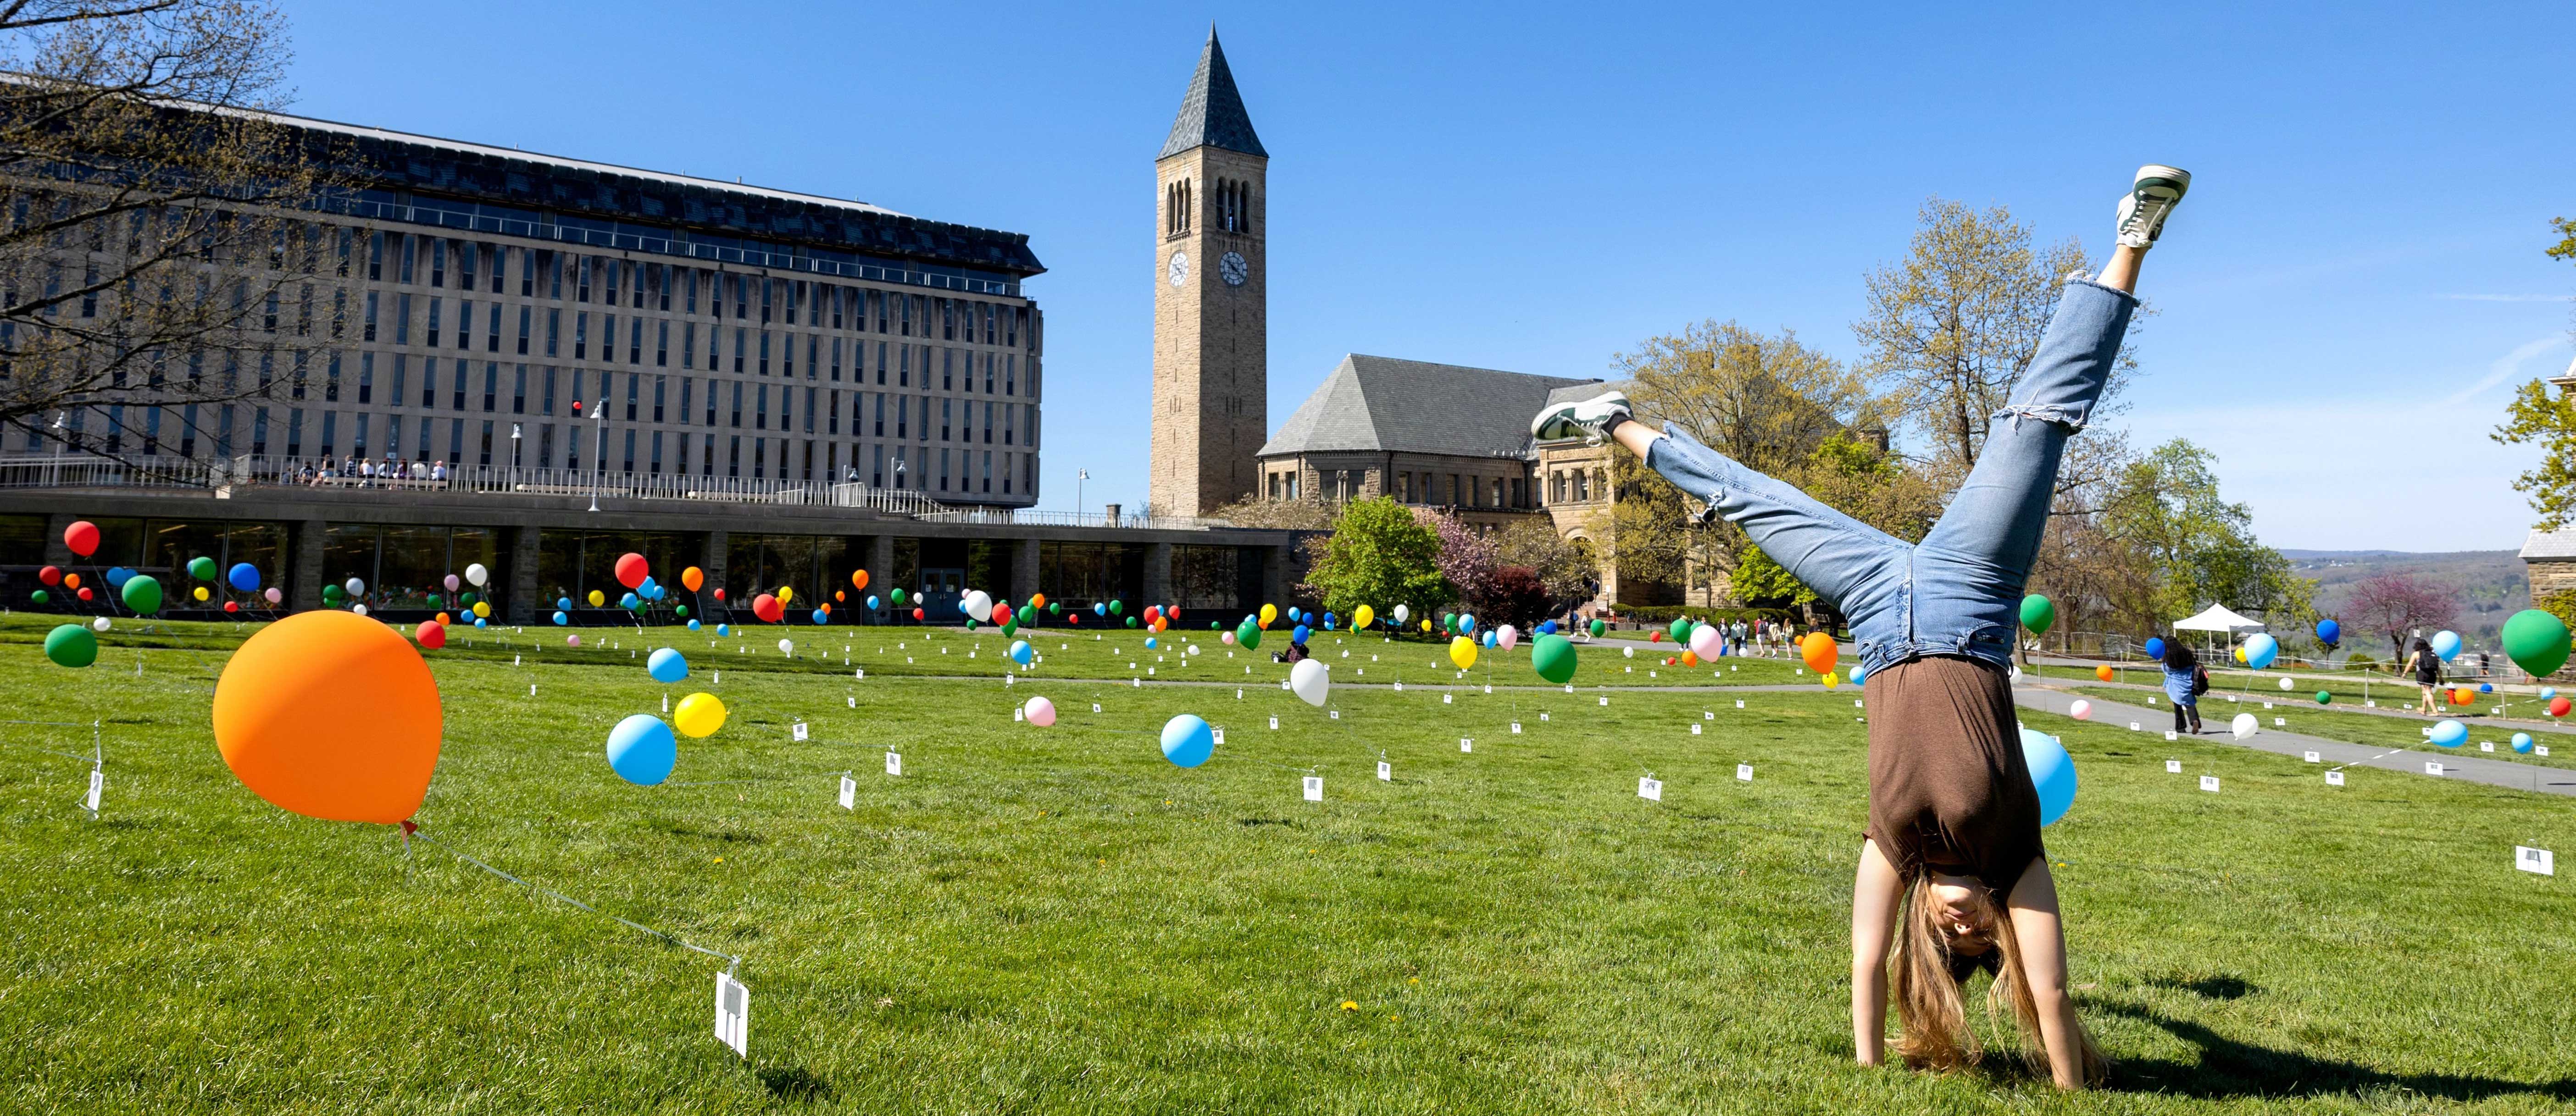 Student stands on head among colorful balloons at "Cornell Lifted" event on the Arts Quad, clocktower in background